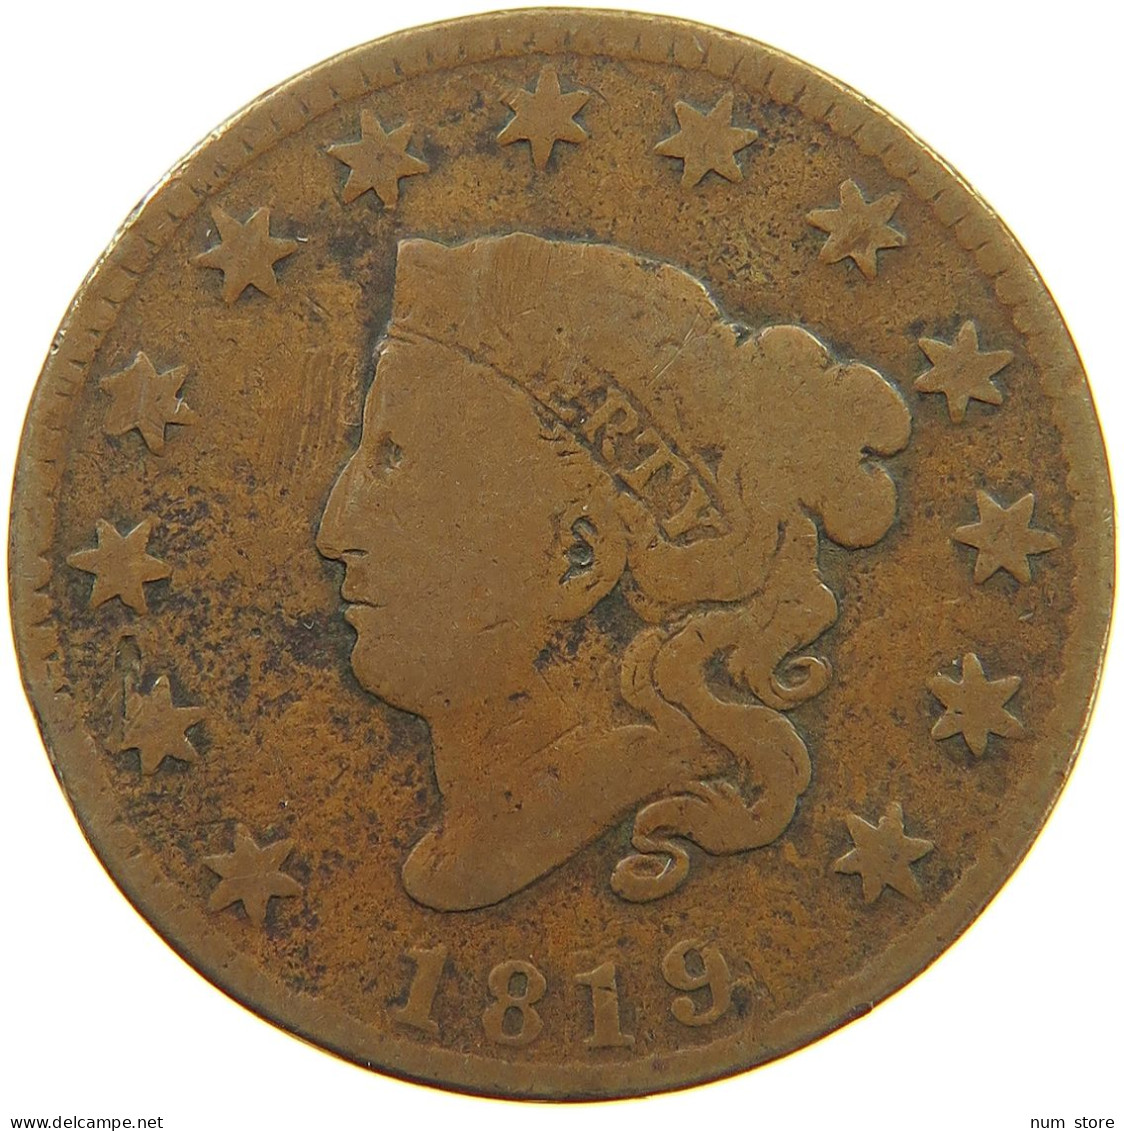 UNITED STATES OF AMERICA LARGE CENT 1819 CORONET HEAD #t114 0185 - 1816-1839: Coronet Head (Tête Couronnée)